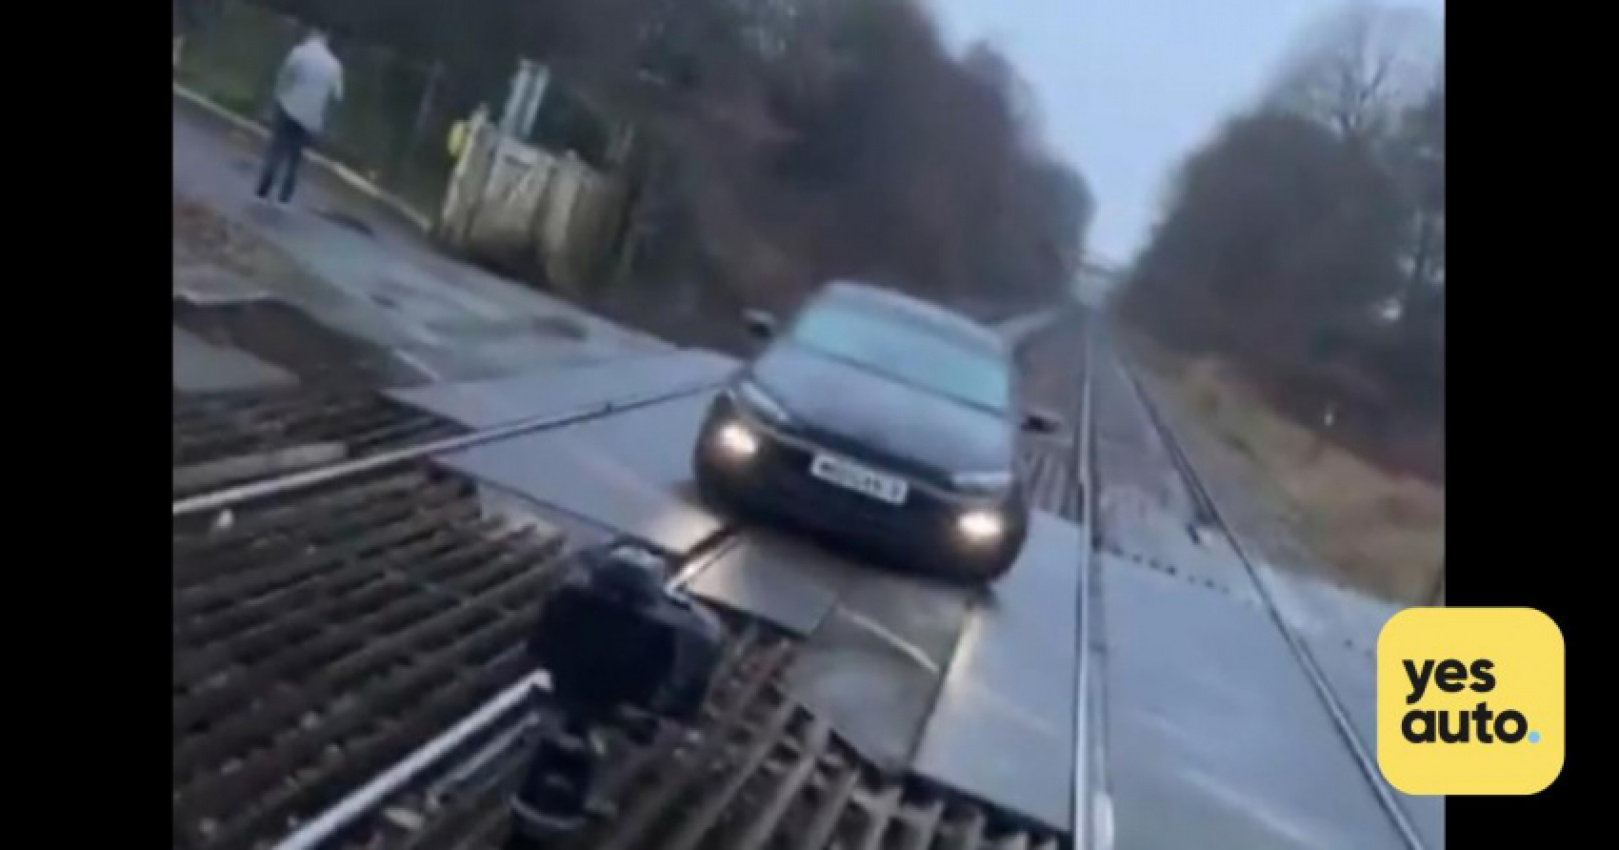 autos, cars, car news, highway code, police investigate car photoshoot on live train track